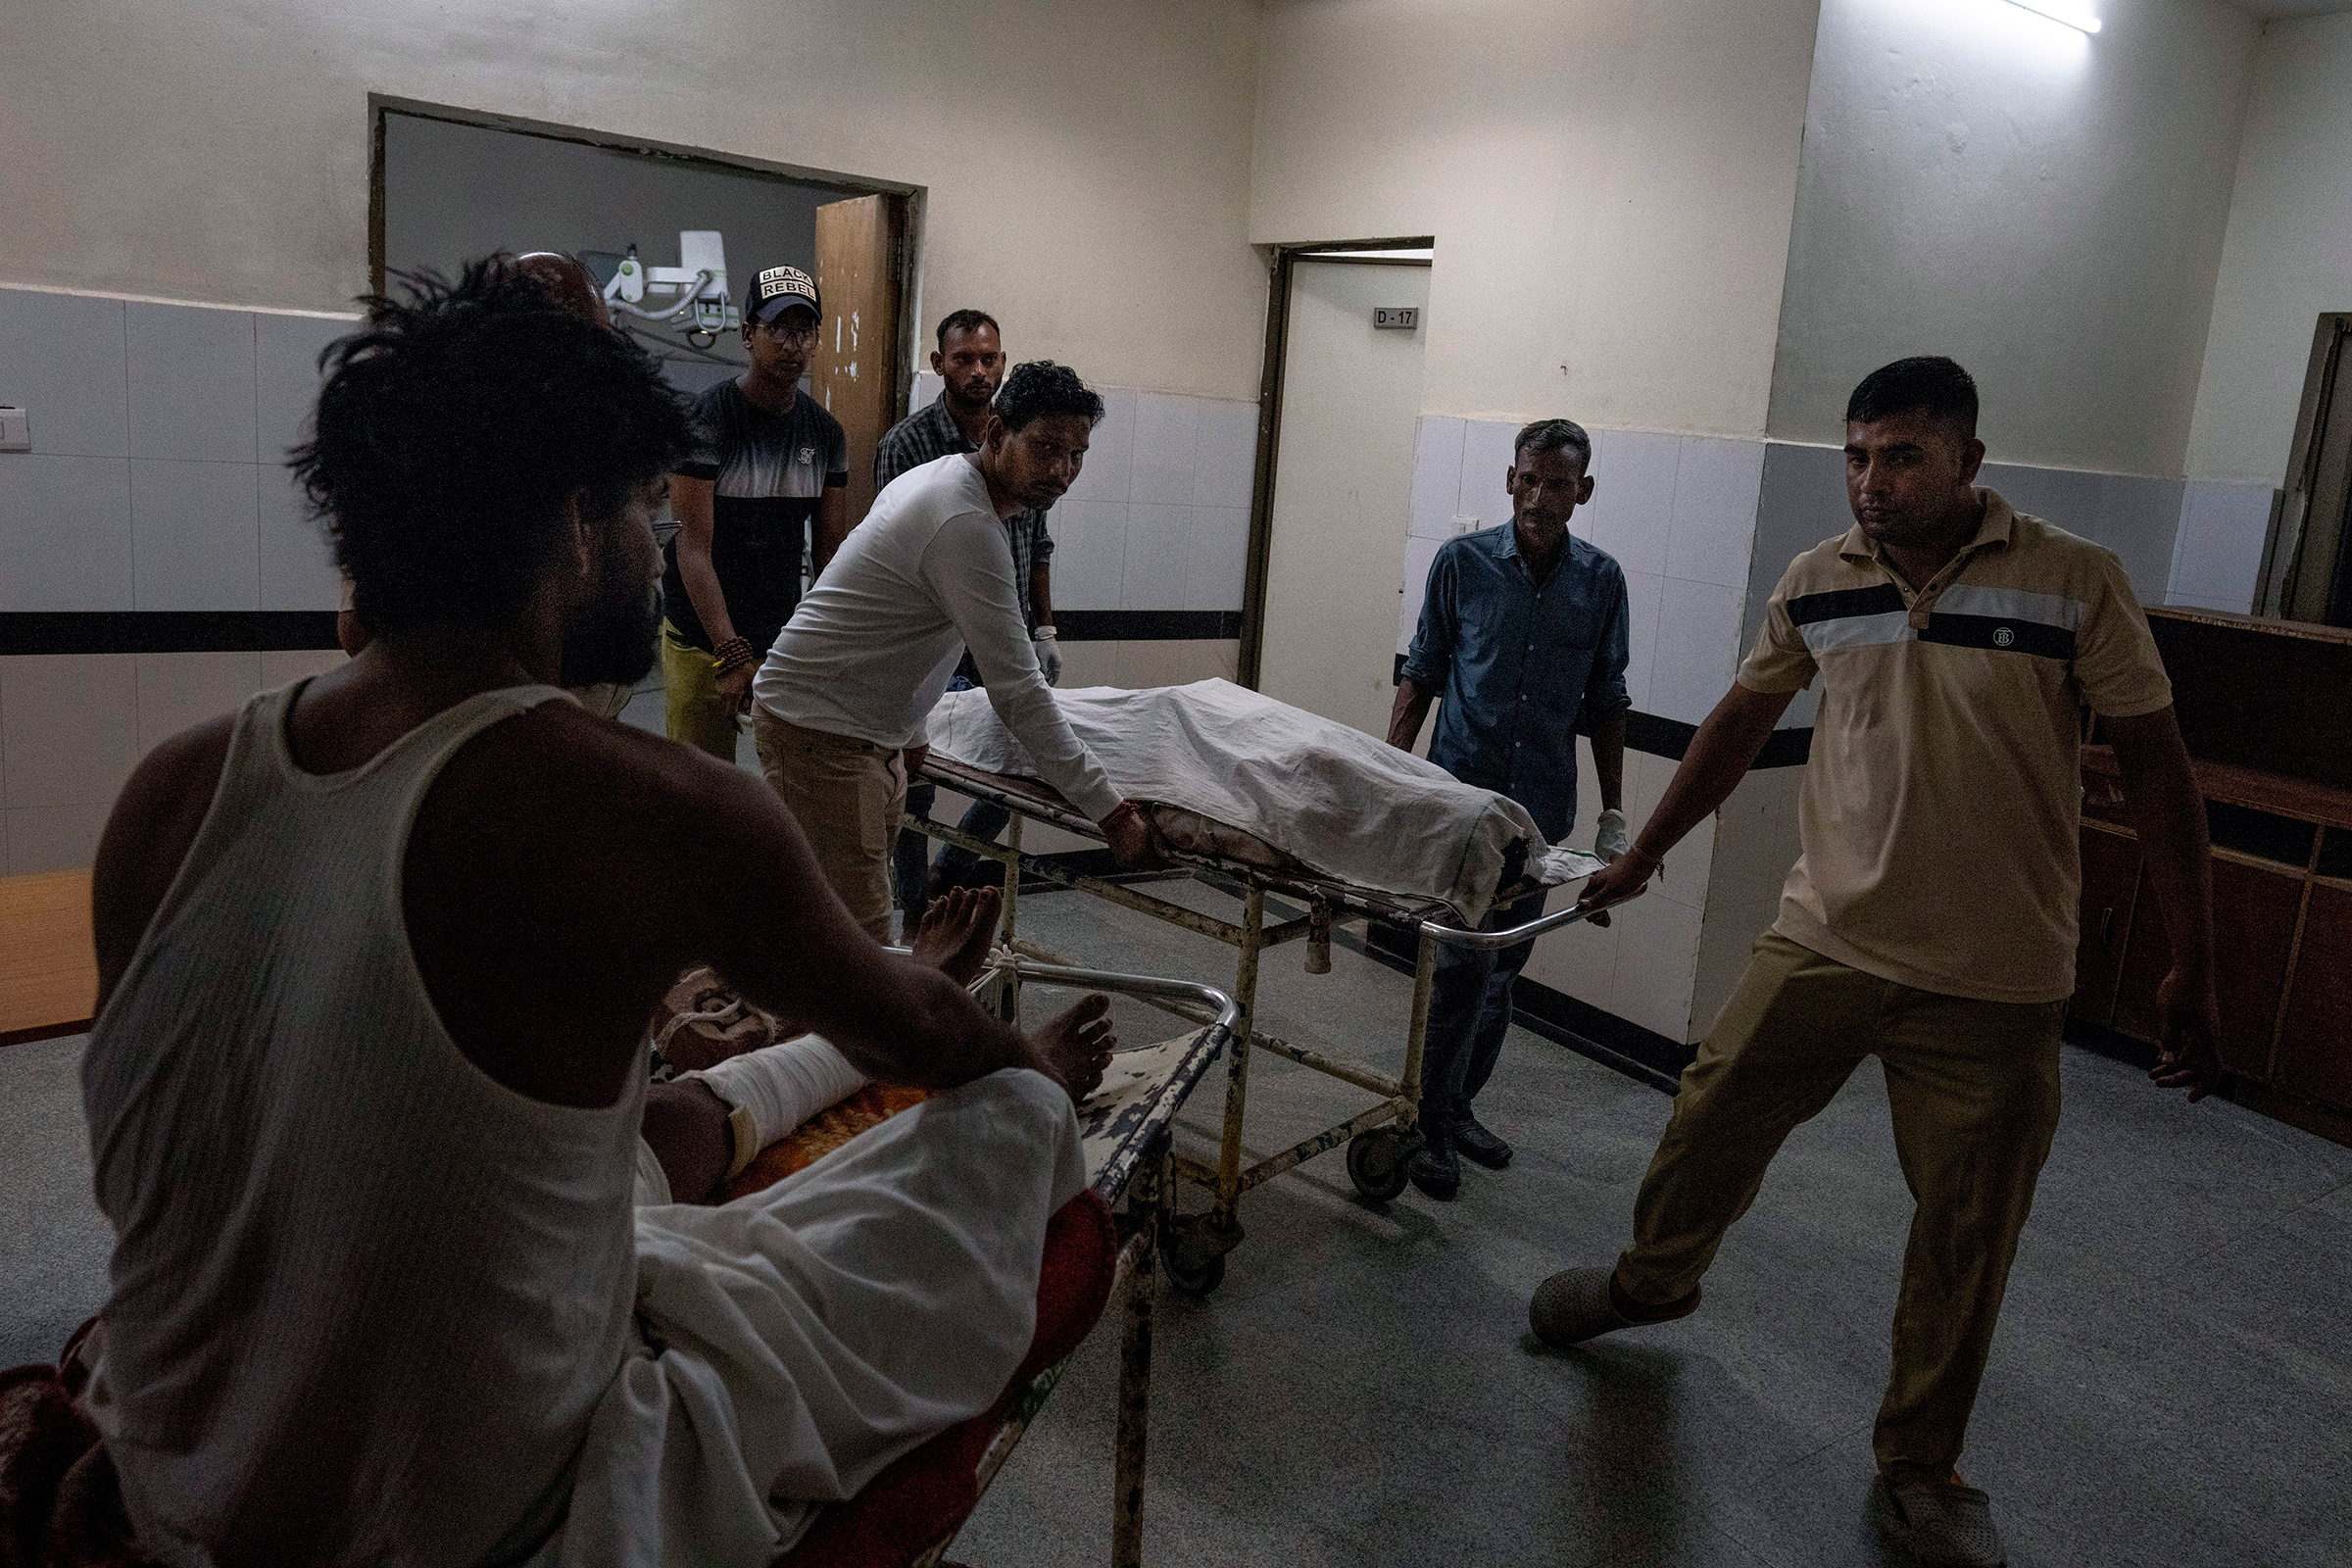 Relatives of Abhishek, who was killed in communal clashes, carry his body on a stretcher at a hospital in Nuh, Haryana state, on Aug. 1.